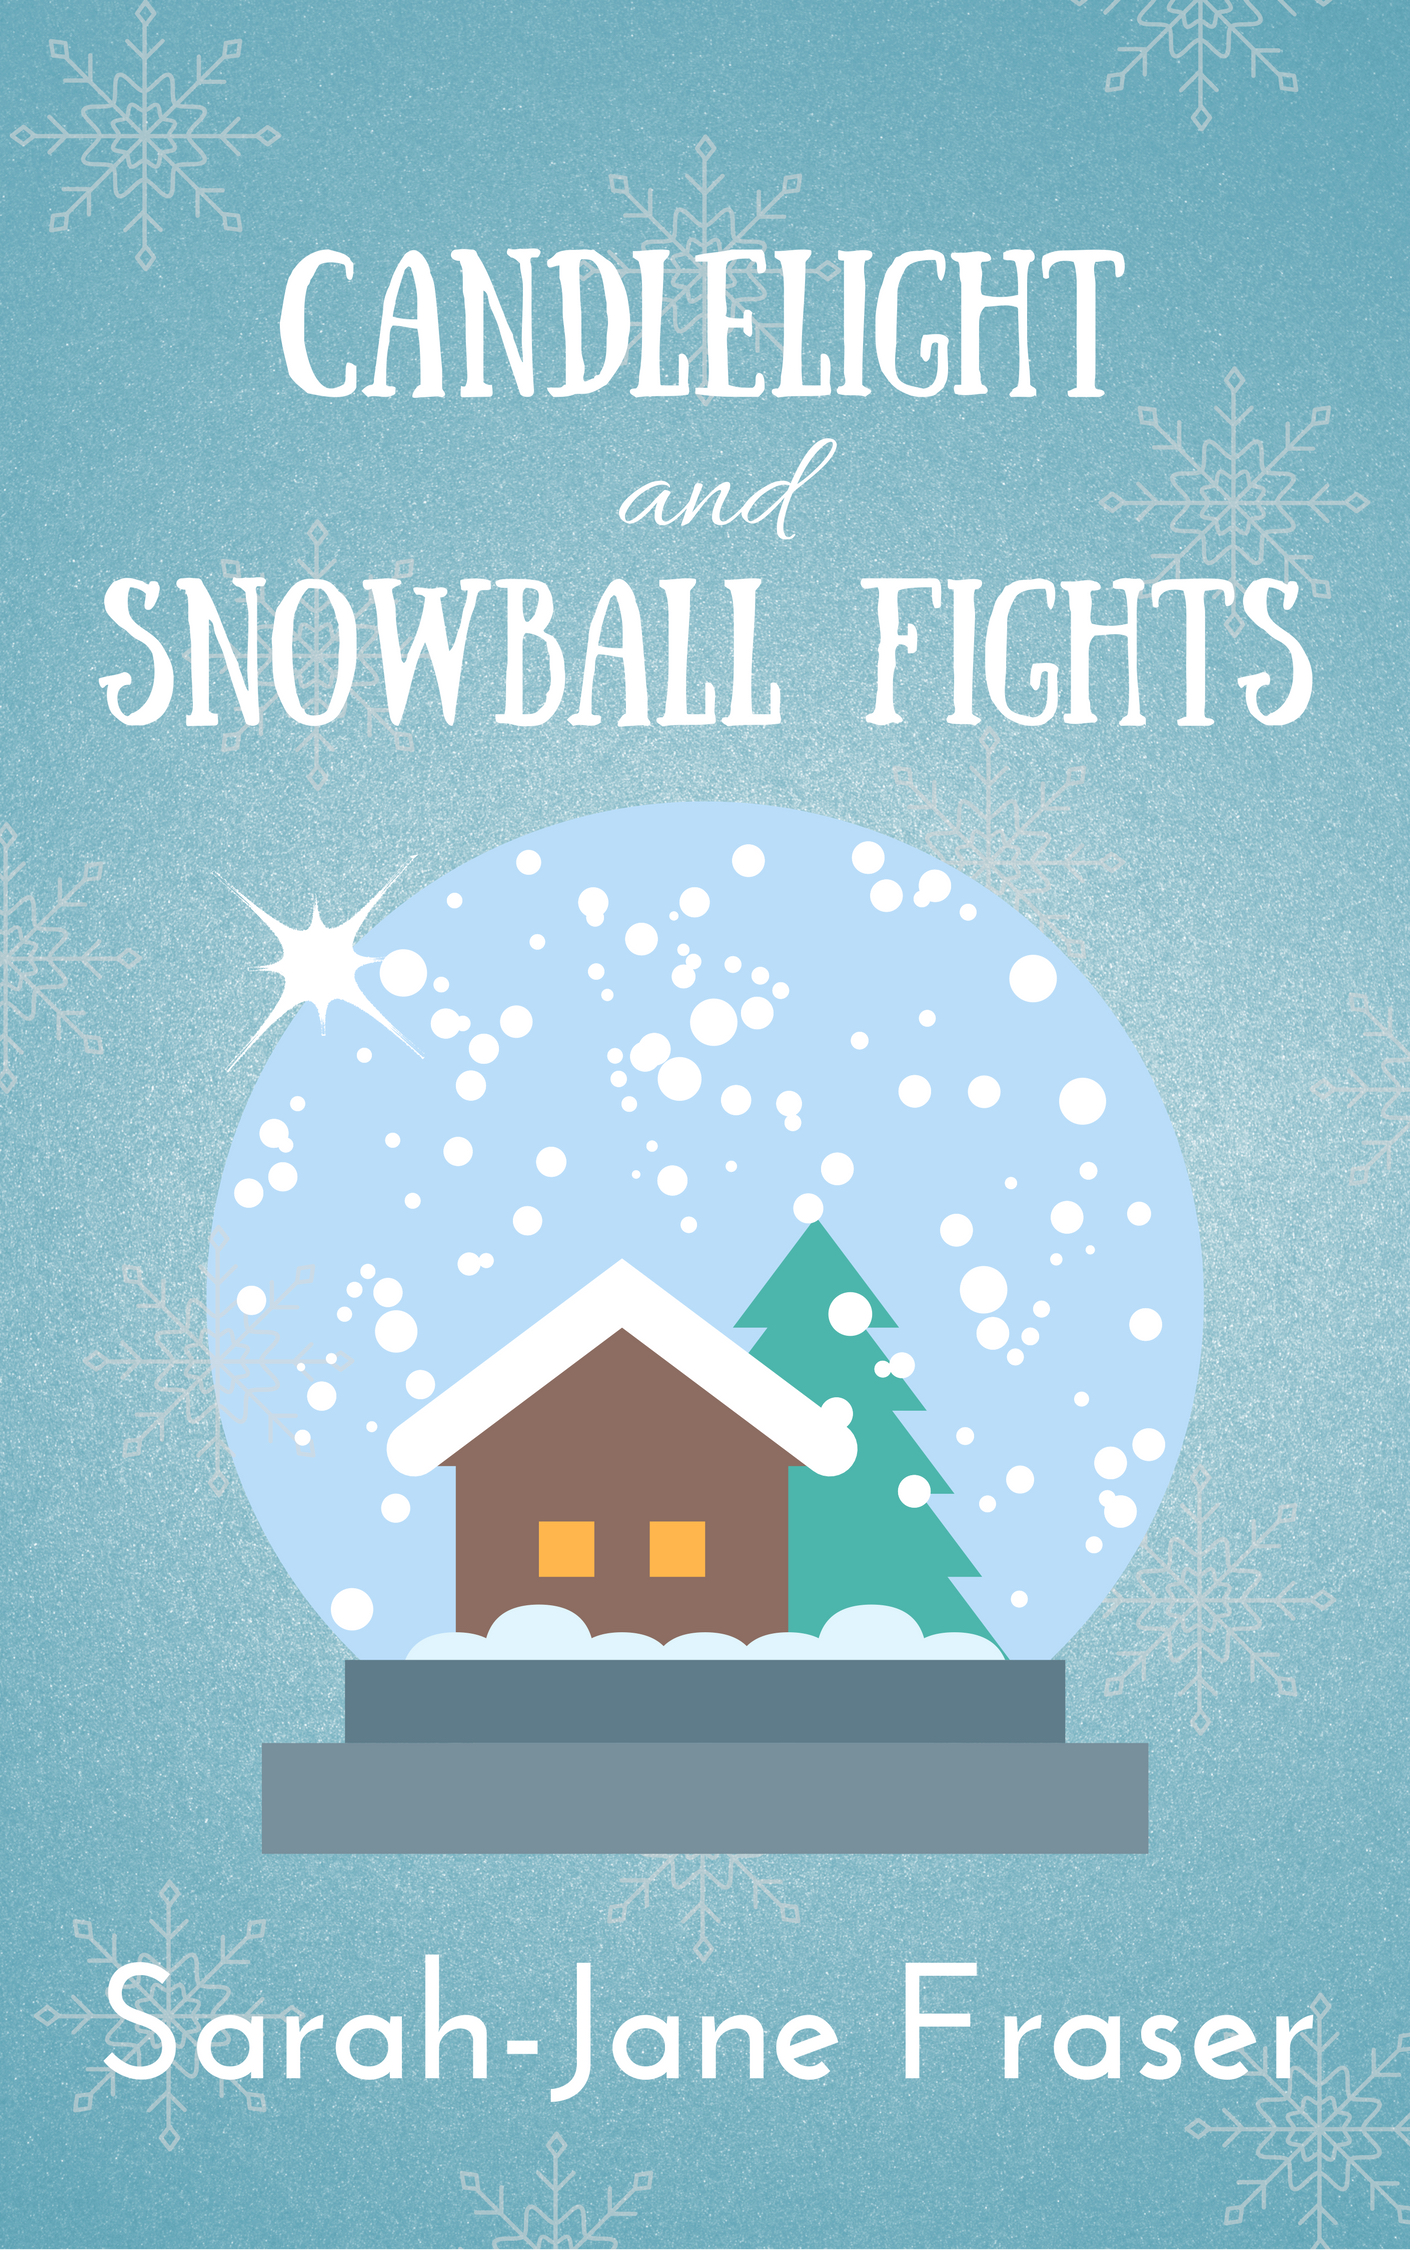 FREE: Candlelight and Snowball Fights by Sarah-Jane Fraser